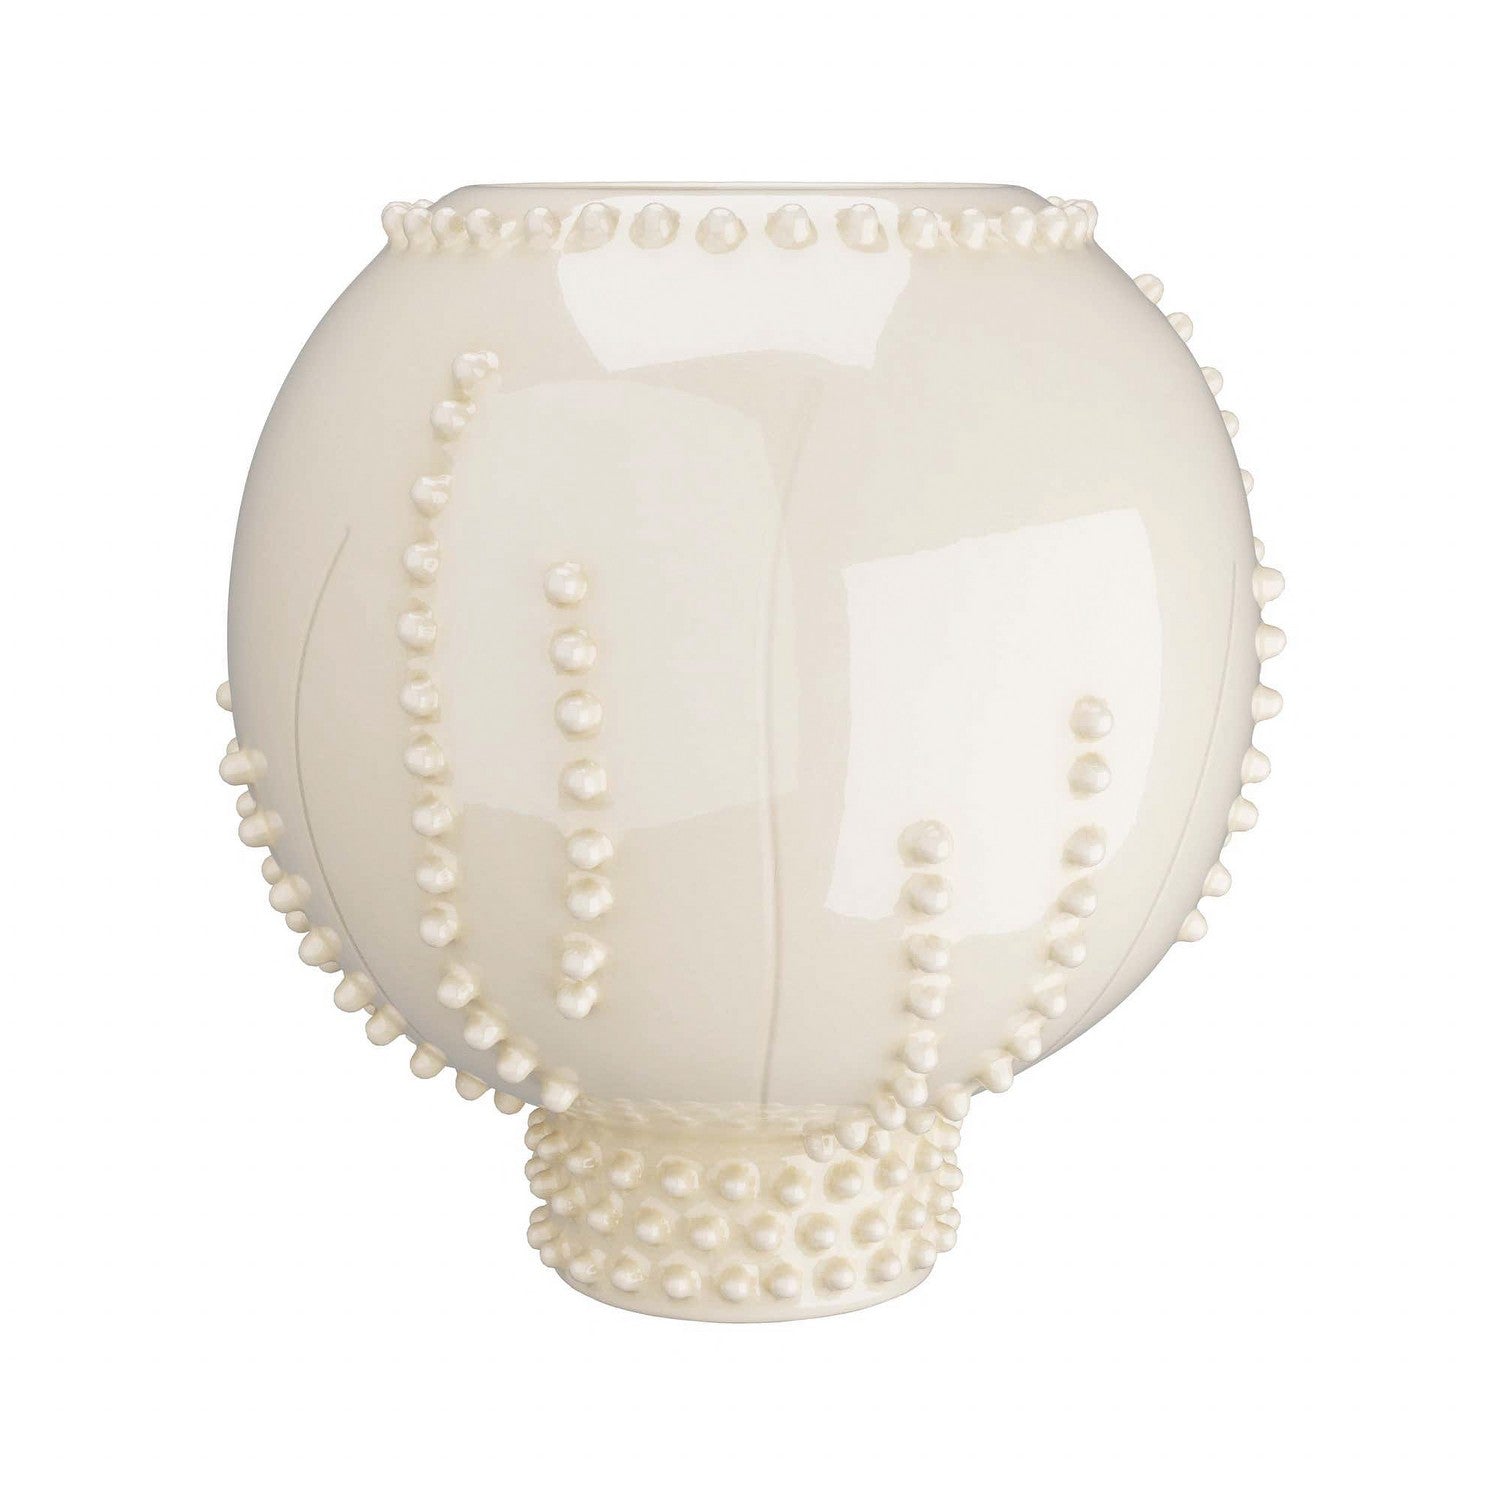 Vase from the Spitzy collection in Ivory finish